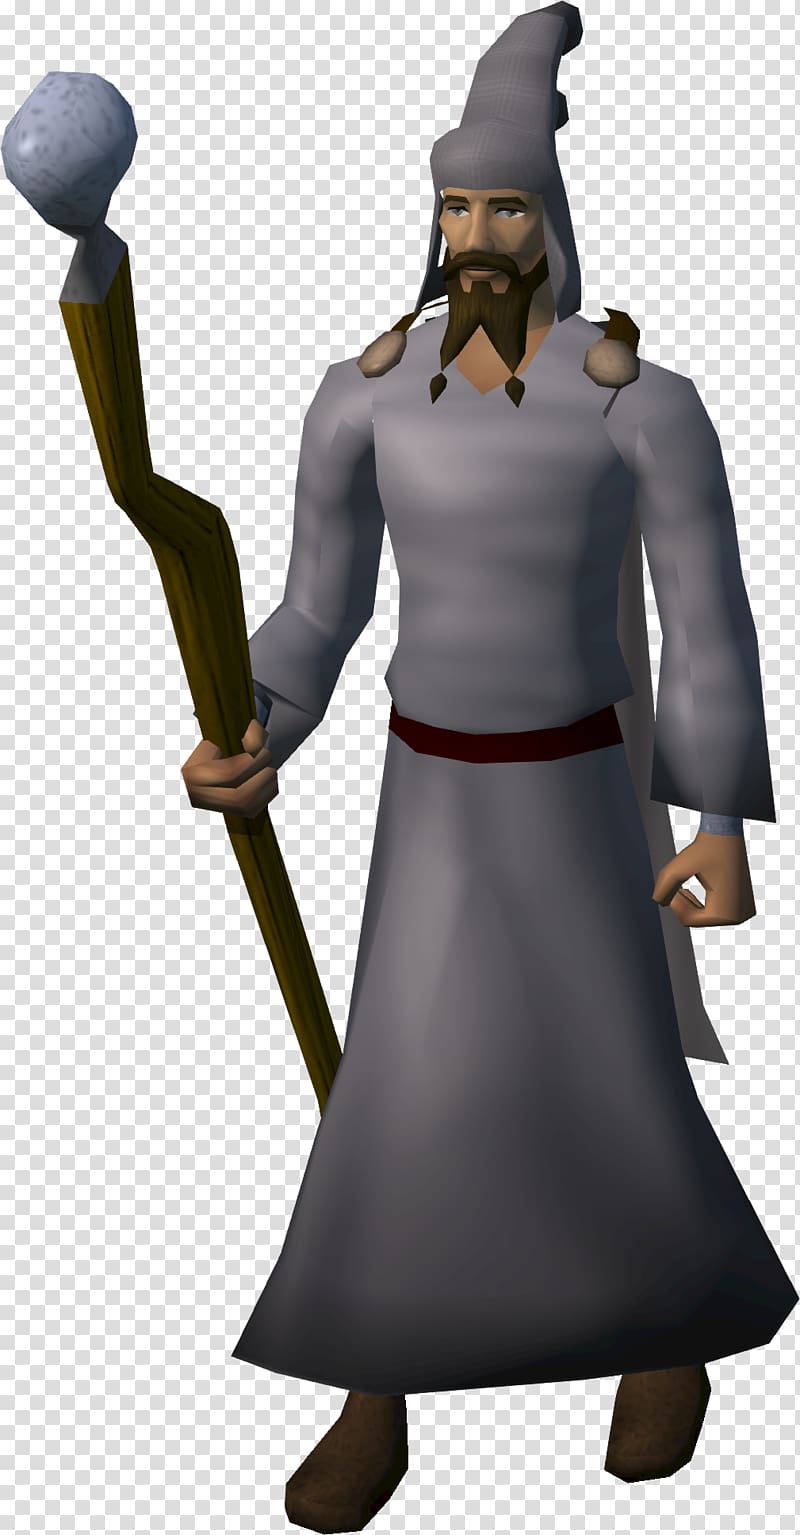 Old School RuneScape Wizard, Wizard File transparent background PNG clipart